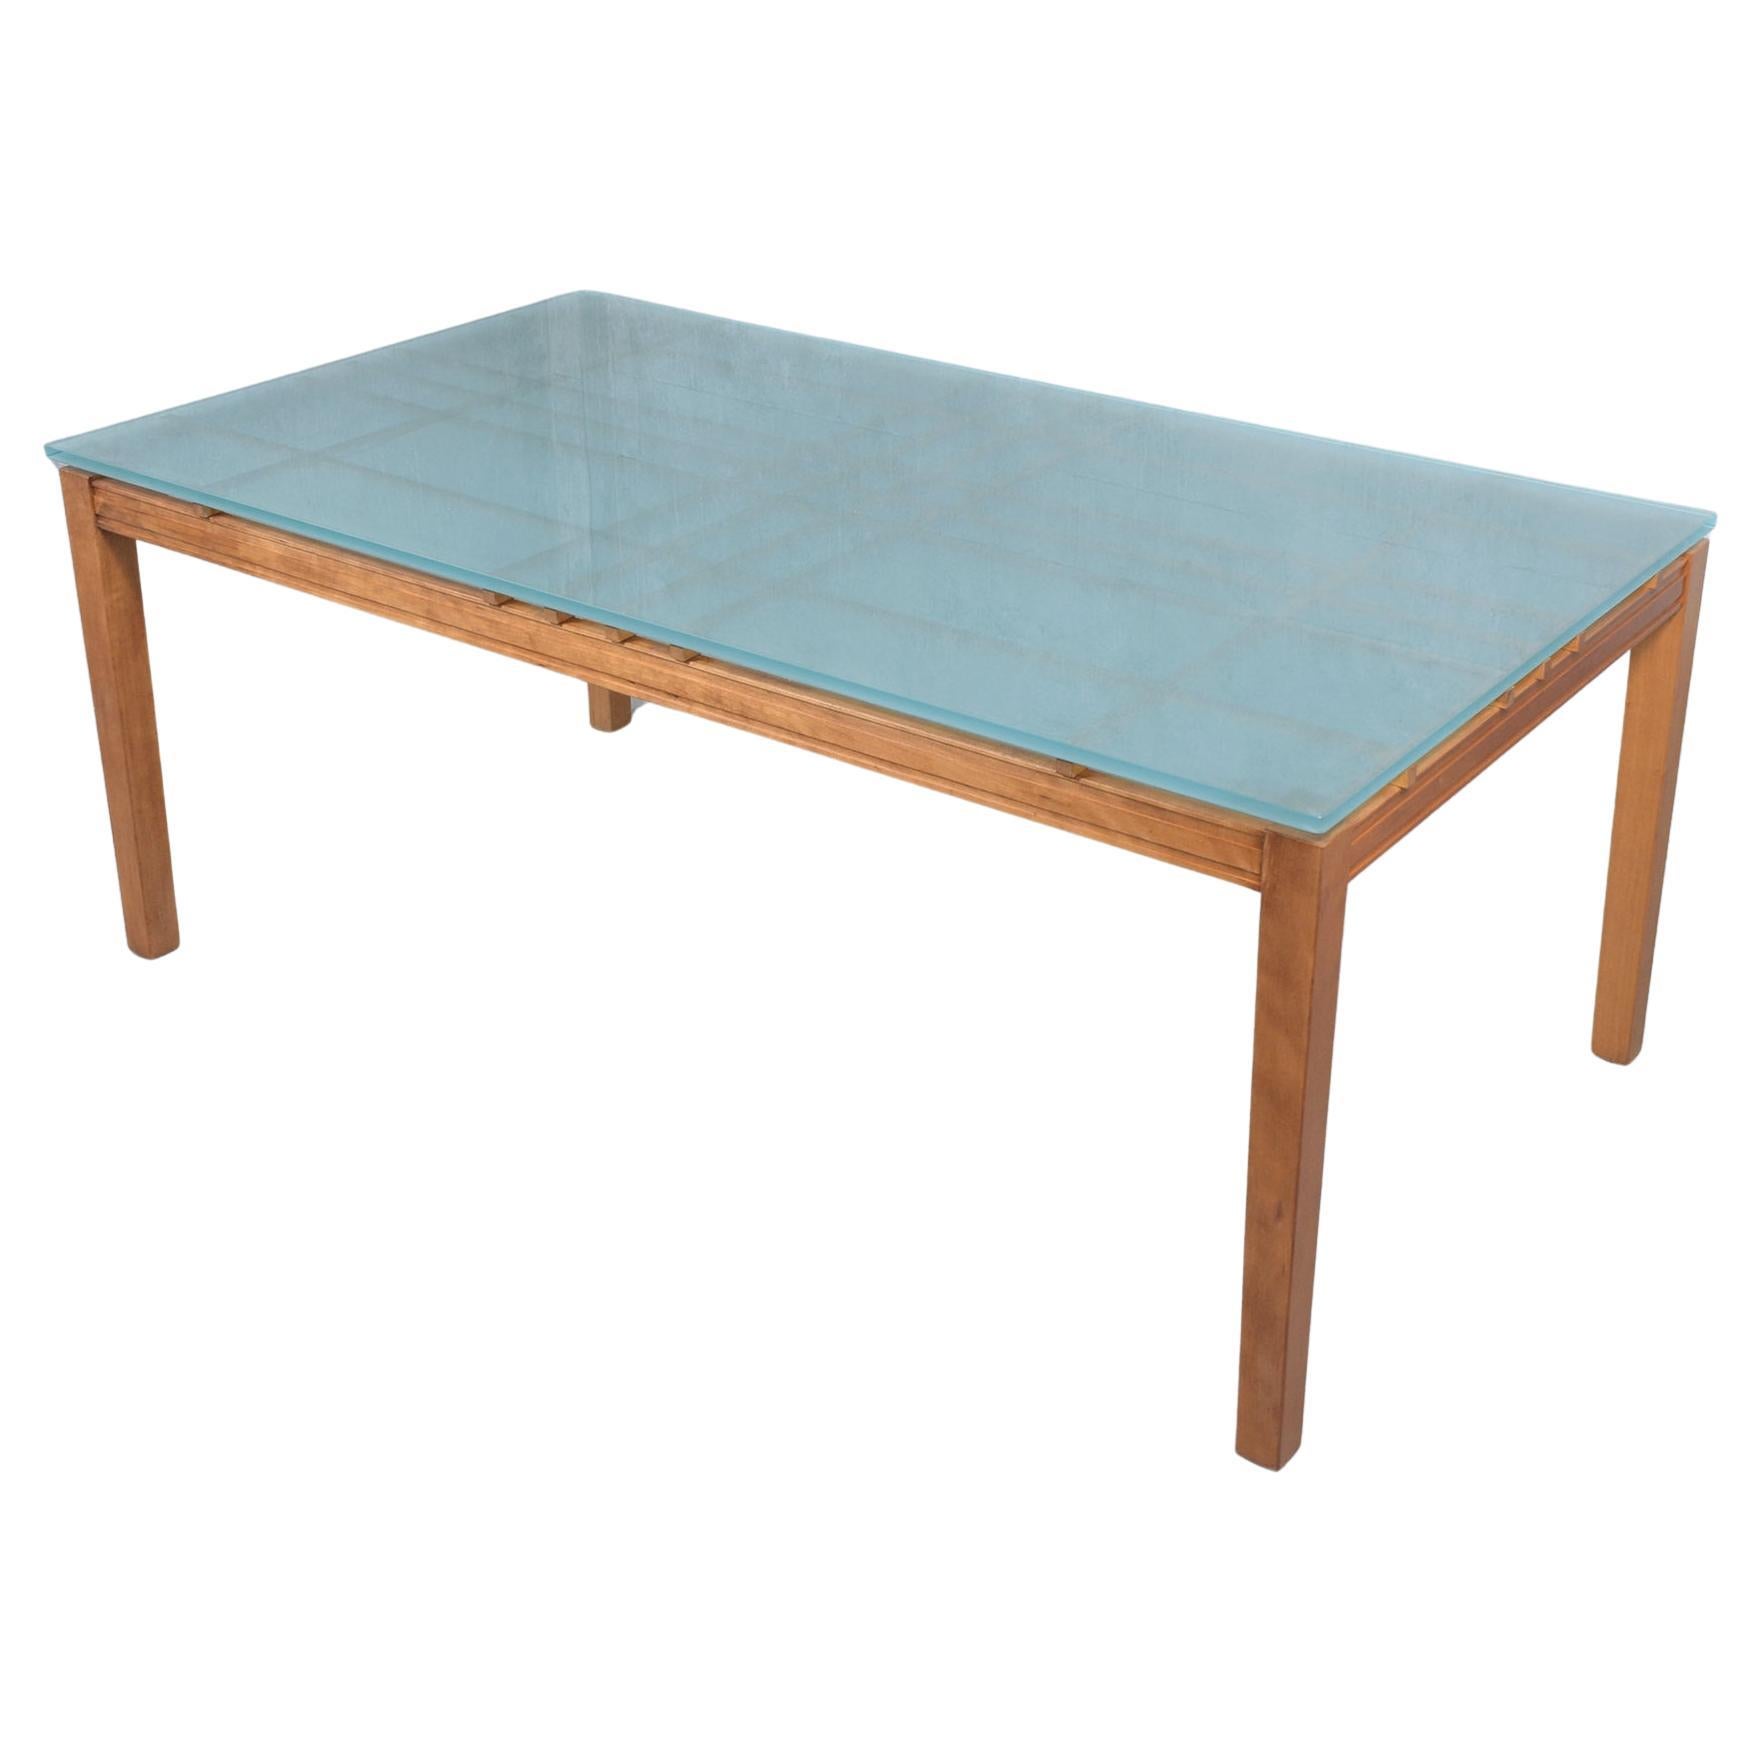 1980s Modern Maple Wood Dining Table with Frosted Glass Top